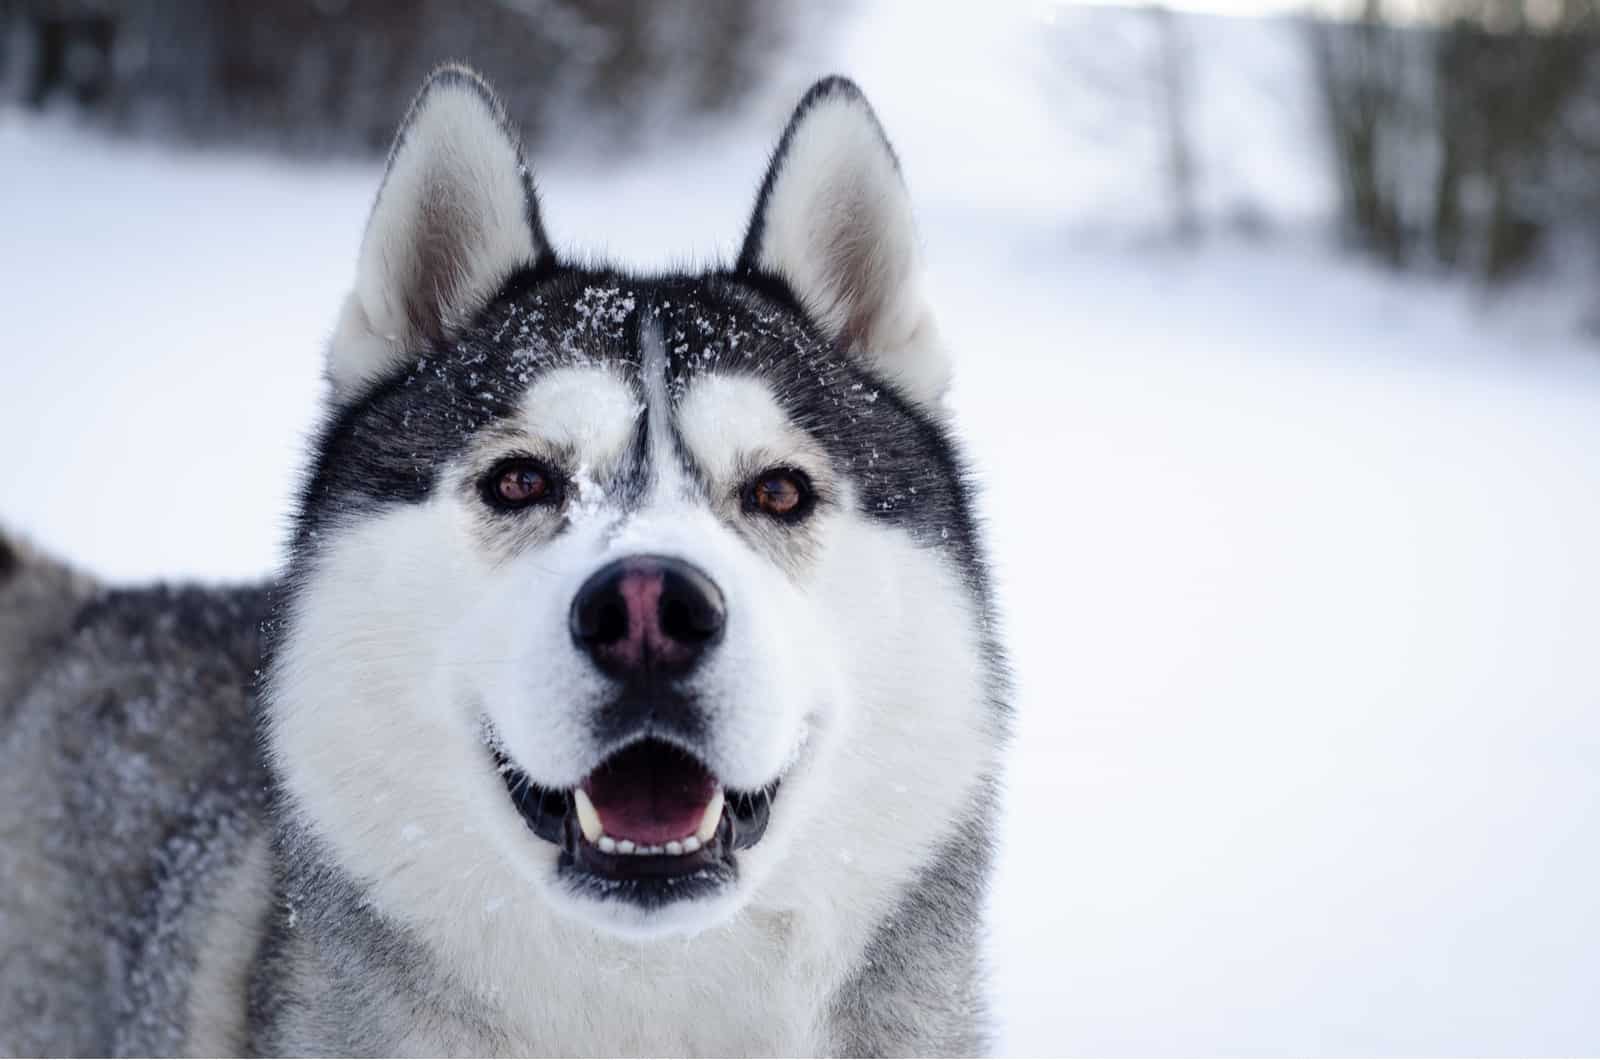 10 Best Collars For Huskies: Reviews And Top Picks